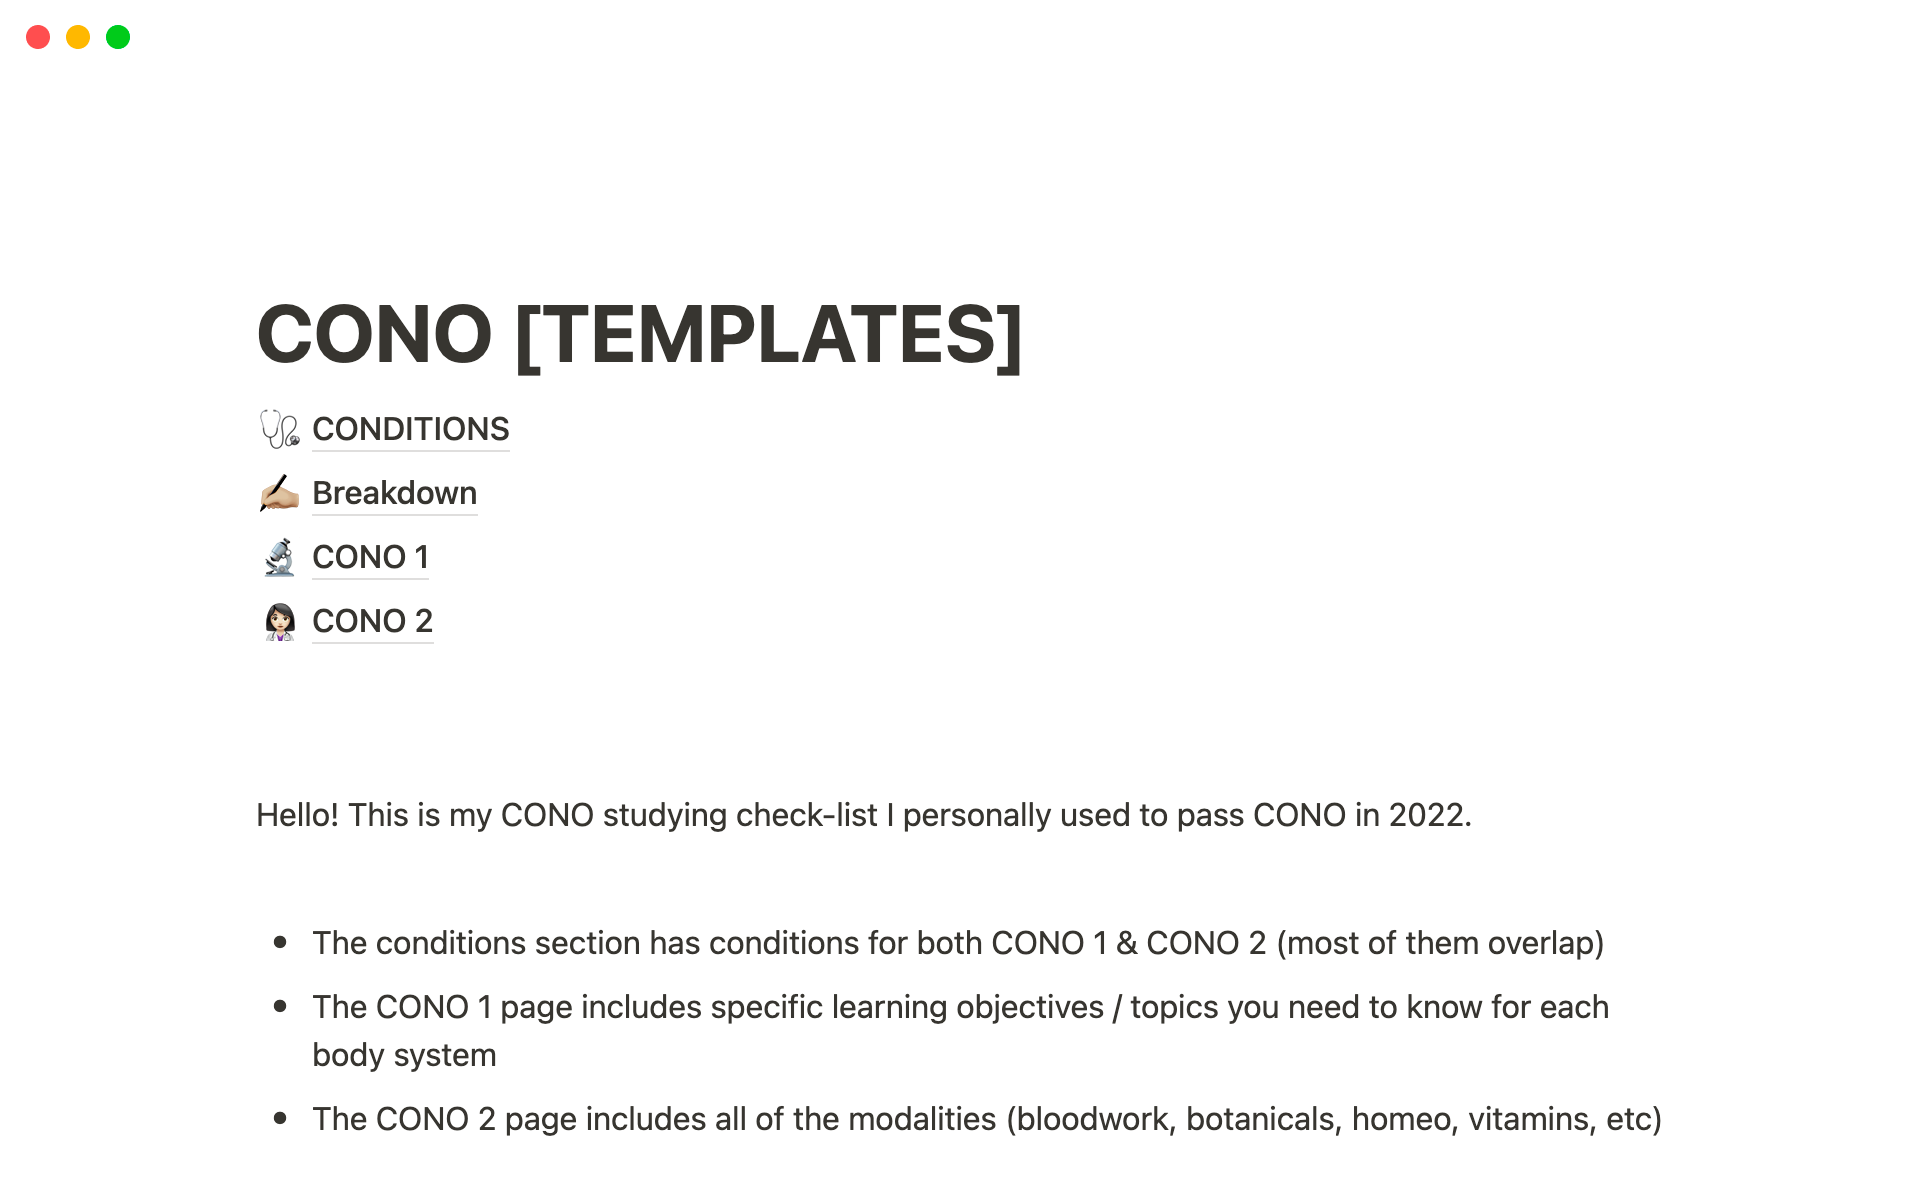 Help stay organized and on track for CONO exams